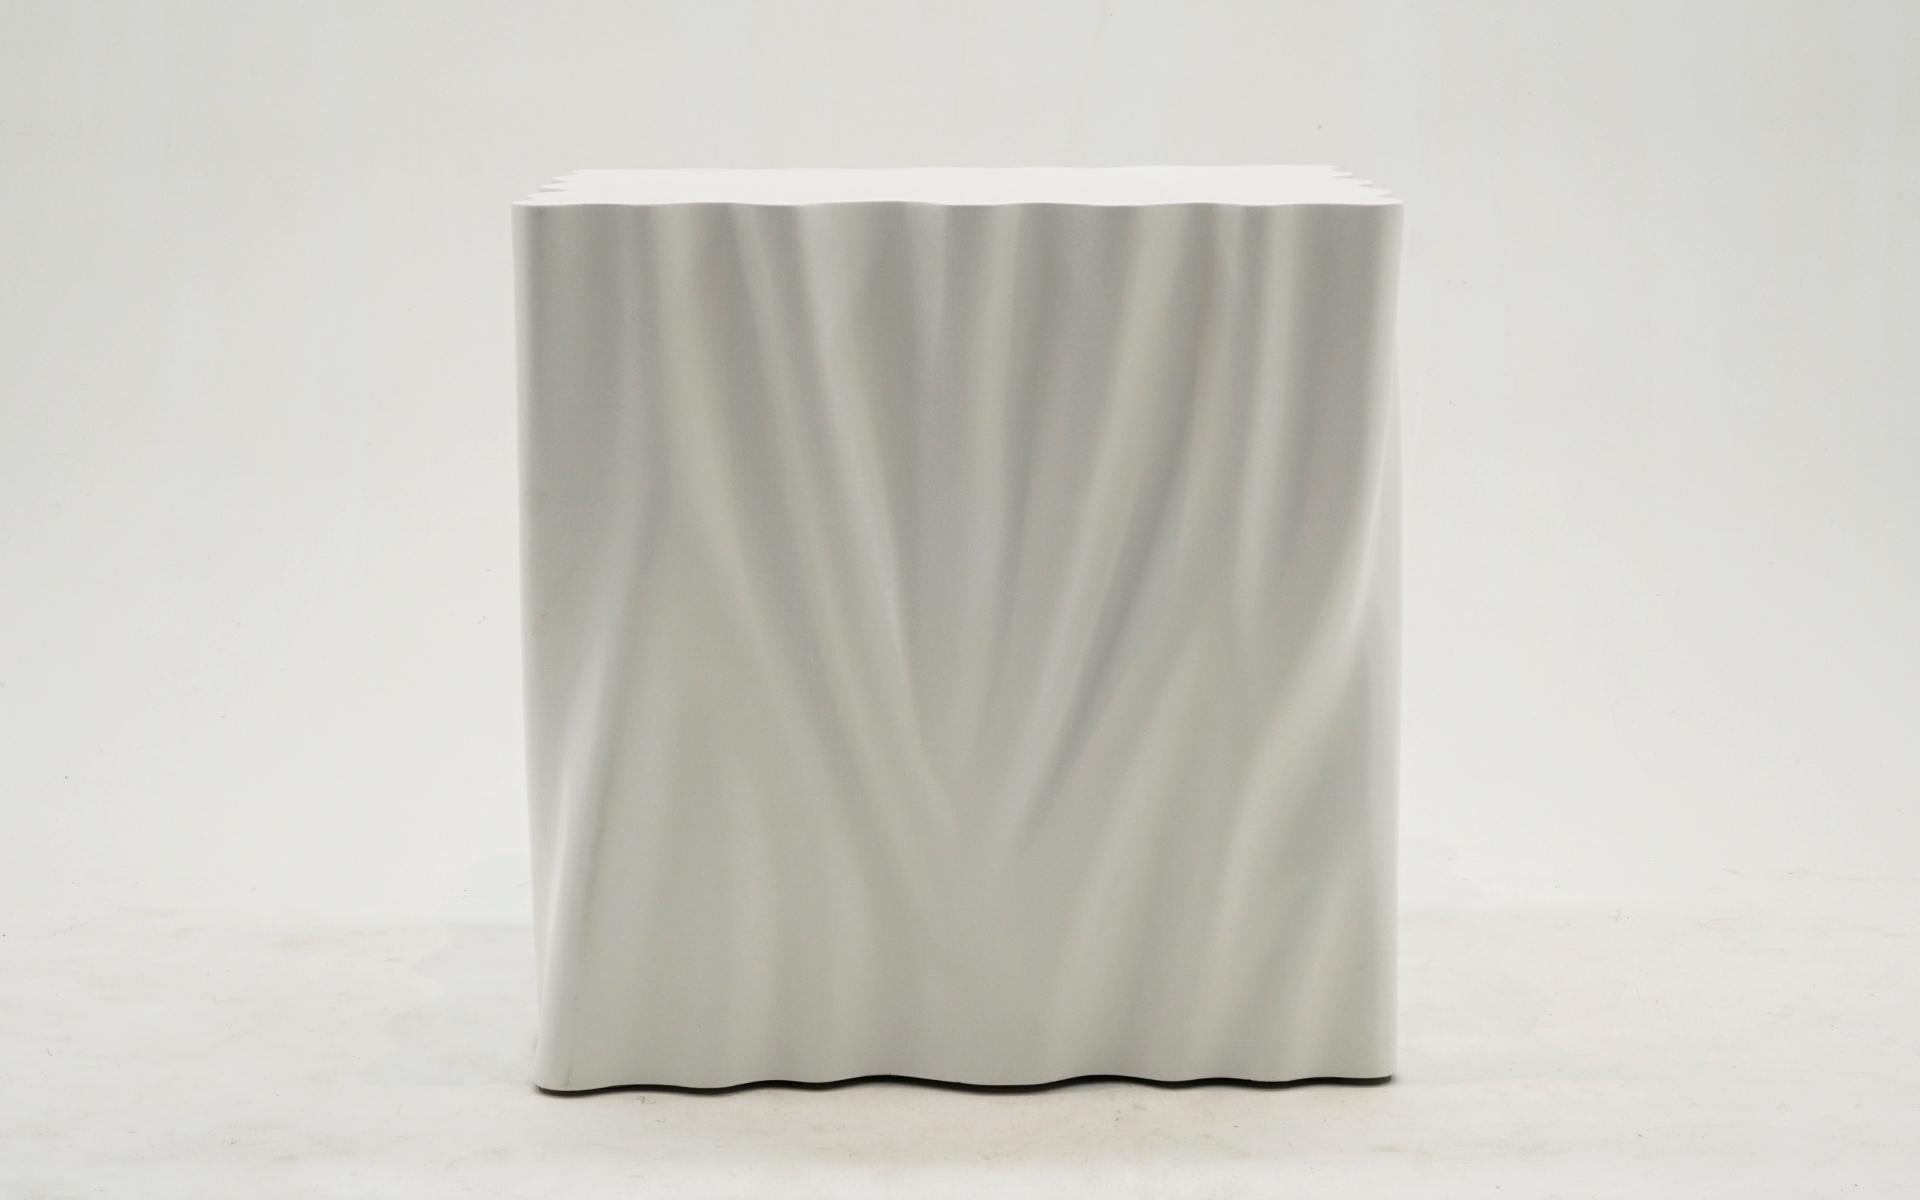 White Pedestal / Table designed by Philippe Starch as a store display piece in Los Angeles, 1990s.  Undulating, organic, draped fabric table cloth design.  Photos don't do it justice.  It has been expertly restored and finished with a high end